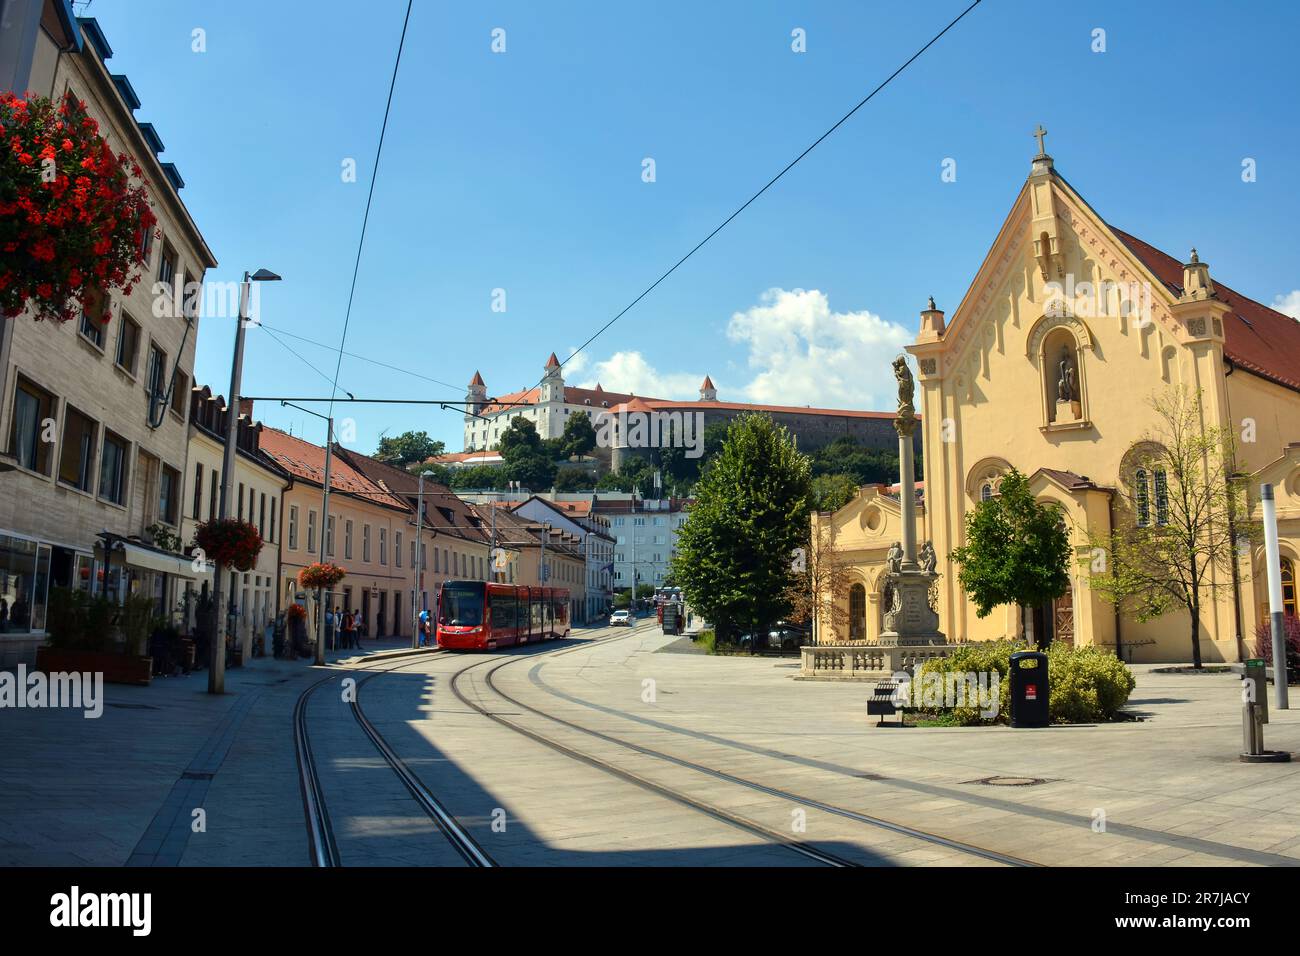 Colorful Streets of Bratislava Old Town, with the St. Stephan Capuchin Church, the Tramway and the Castle in the Background Stock Photo